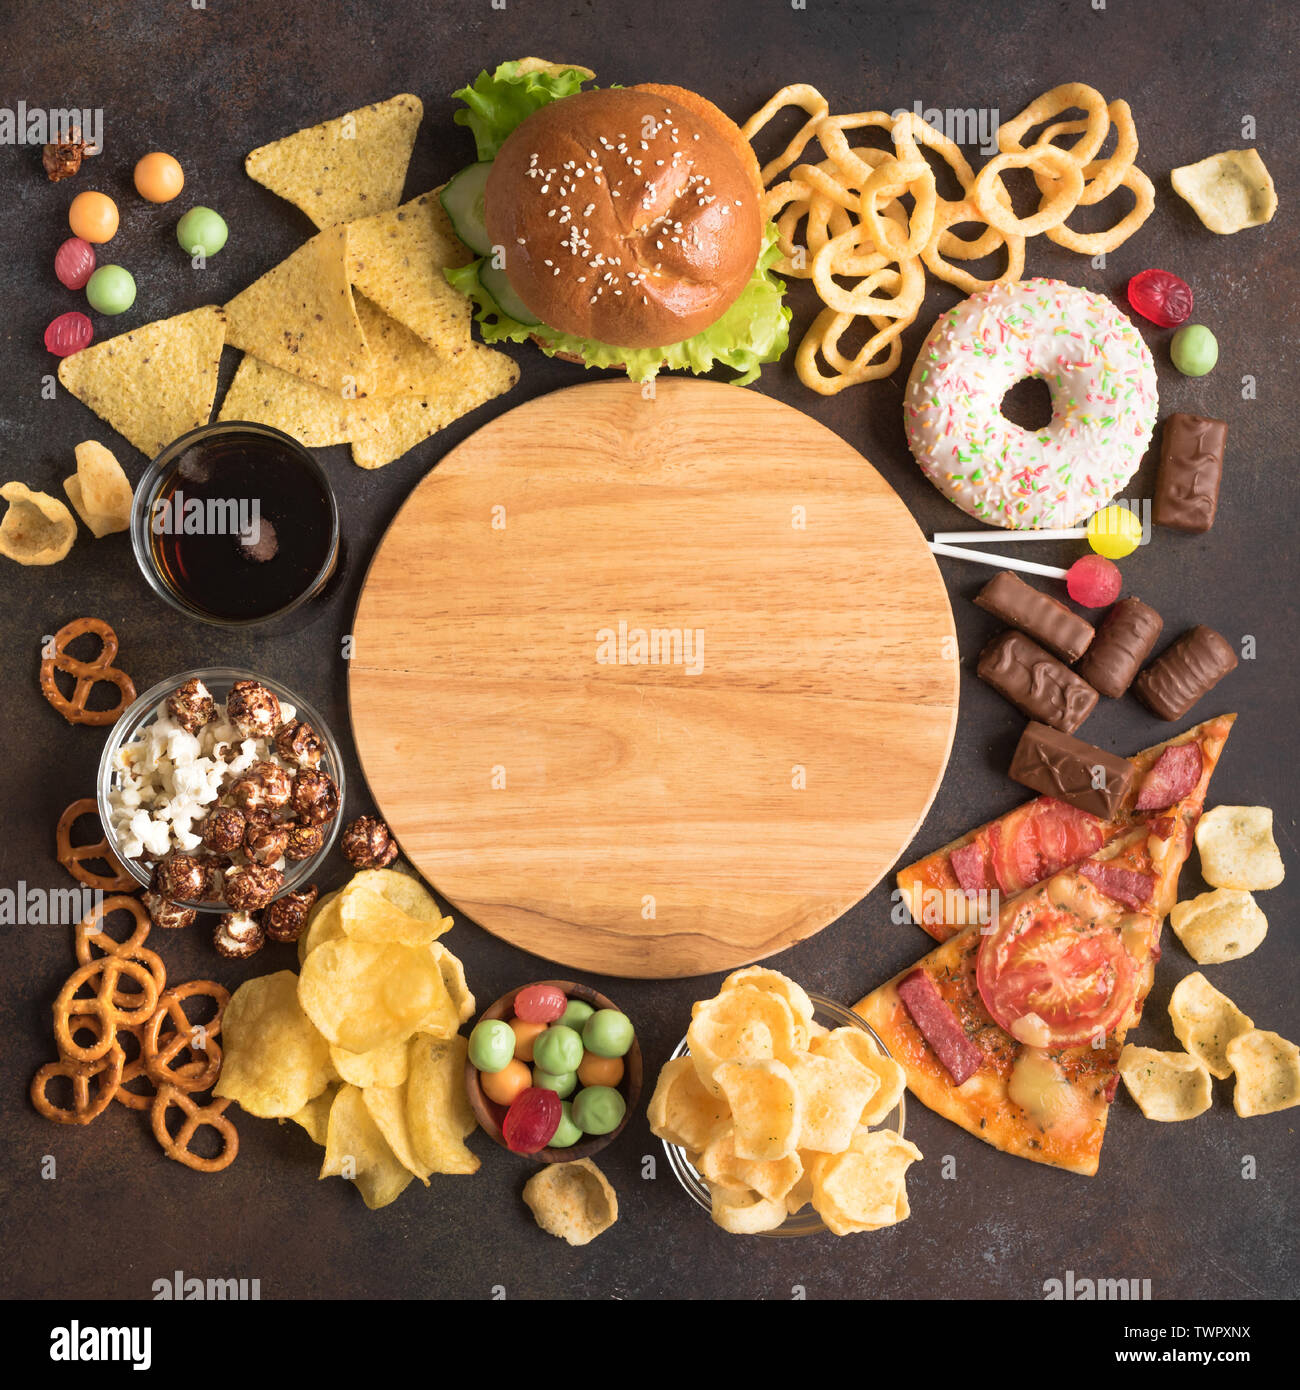 Assortment of Unhealthy Food, top view, flat lay. Unhealthy eating, junk food concept. Stock Photo